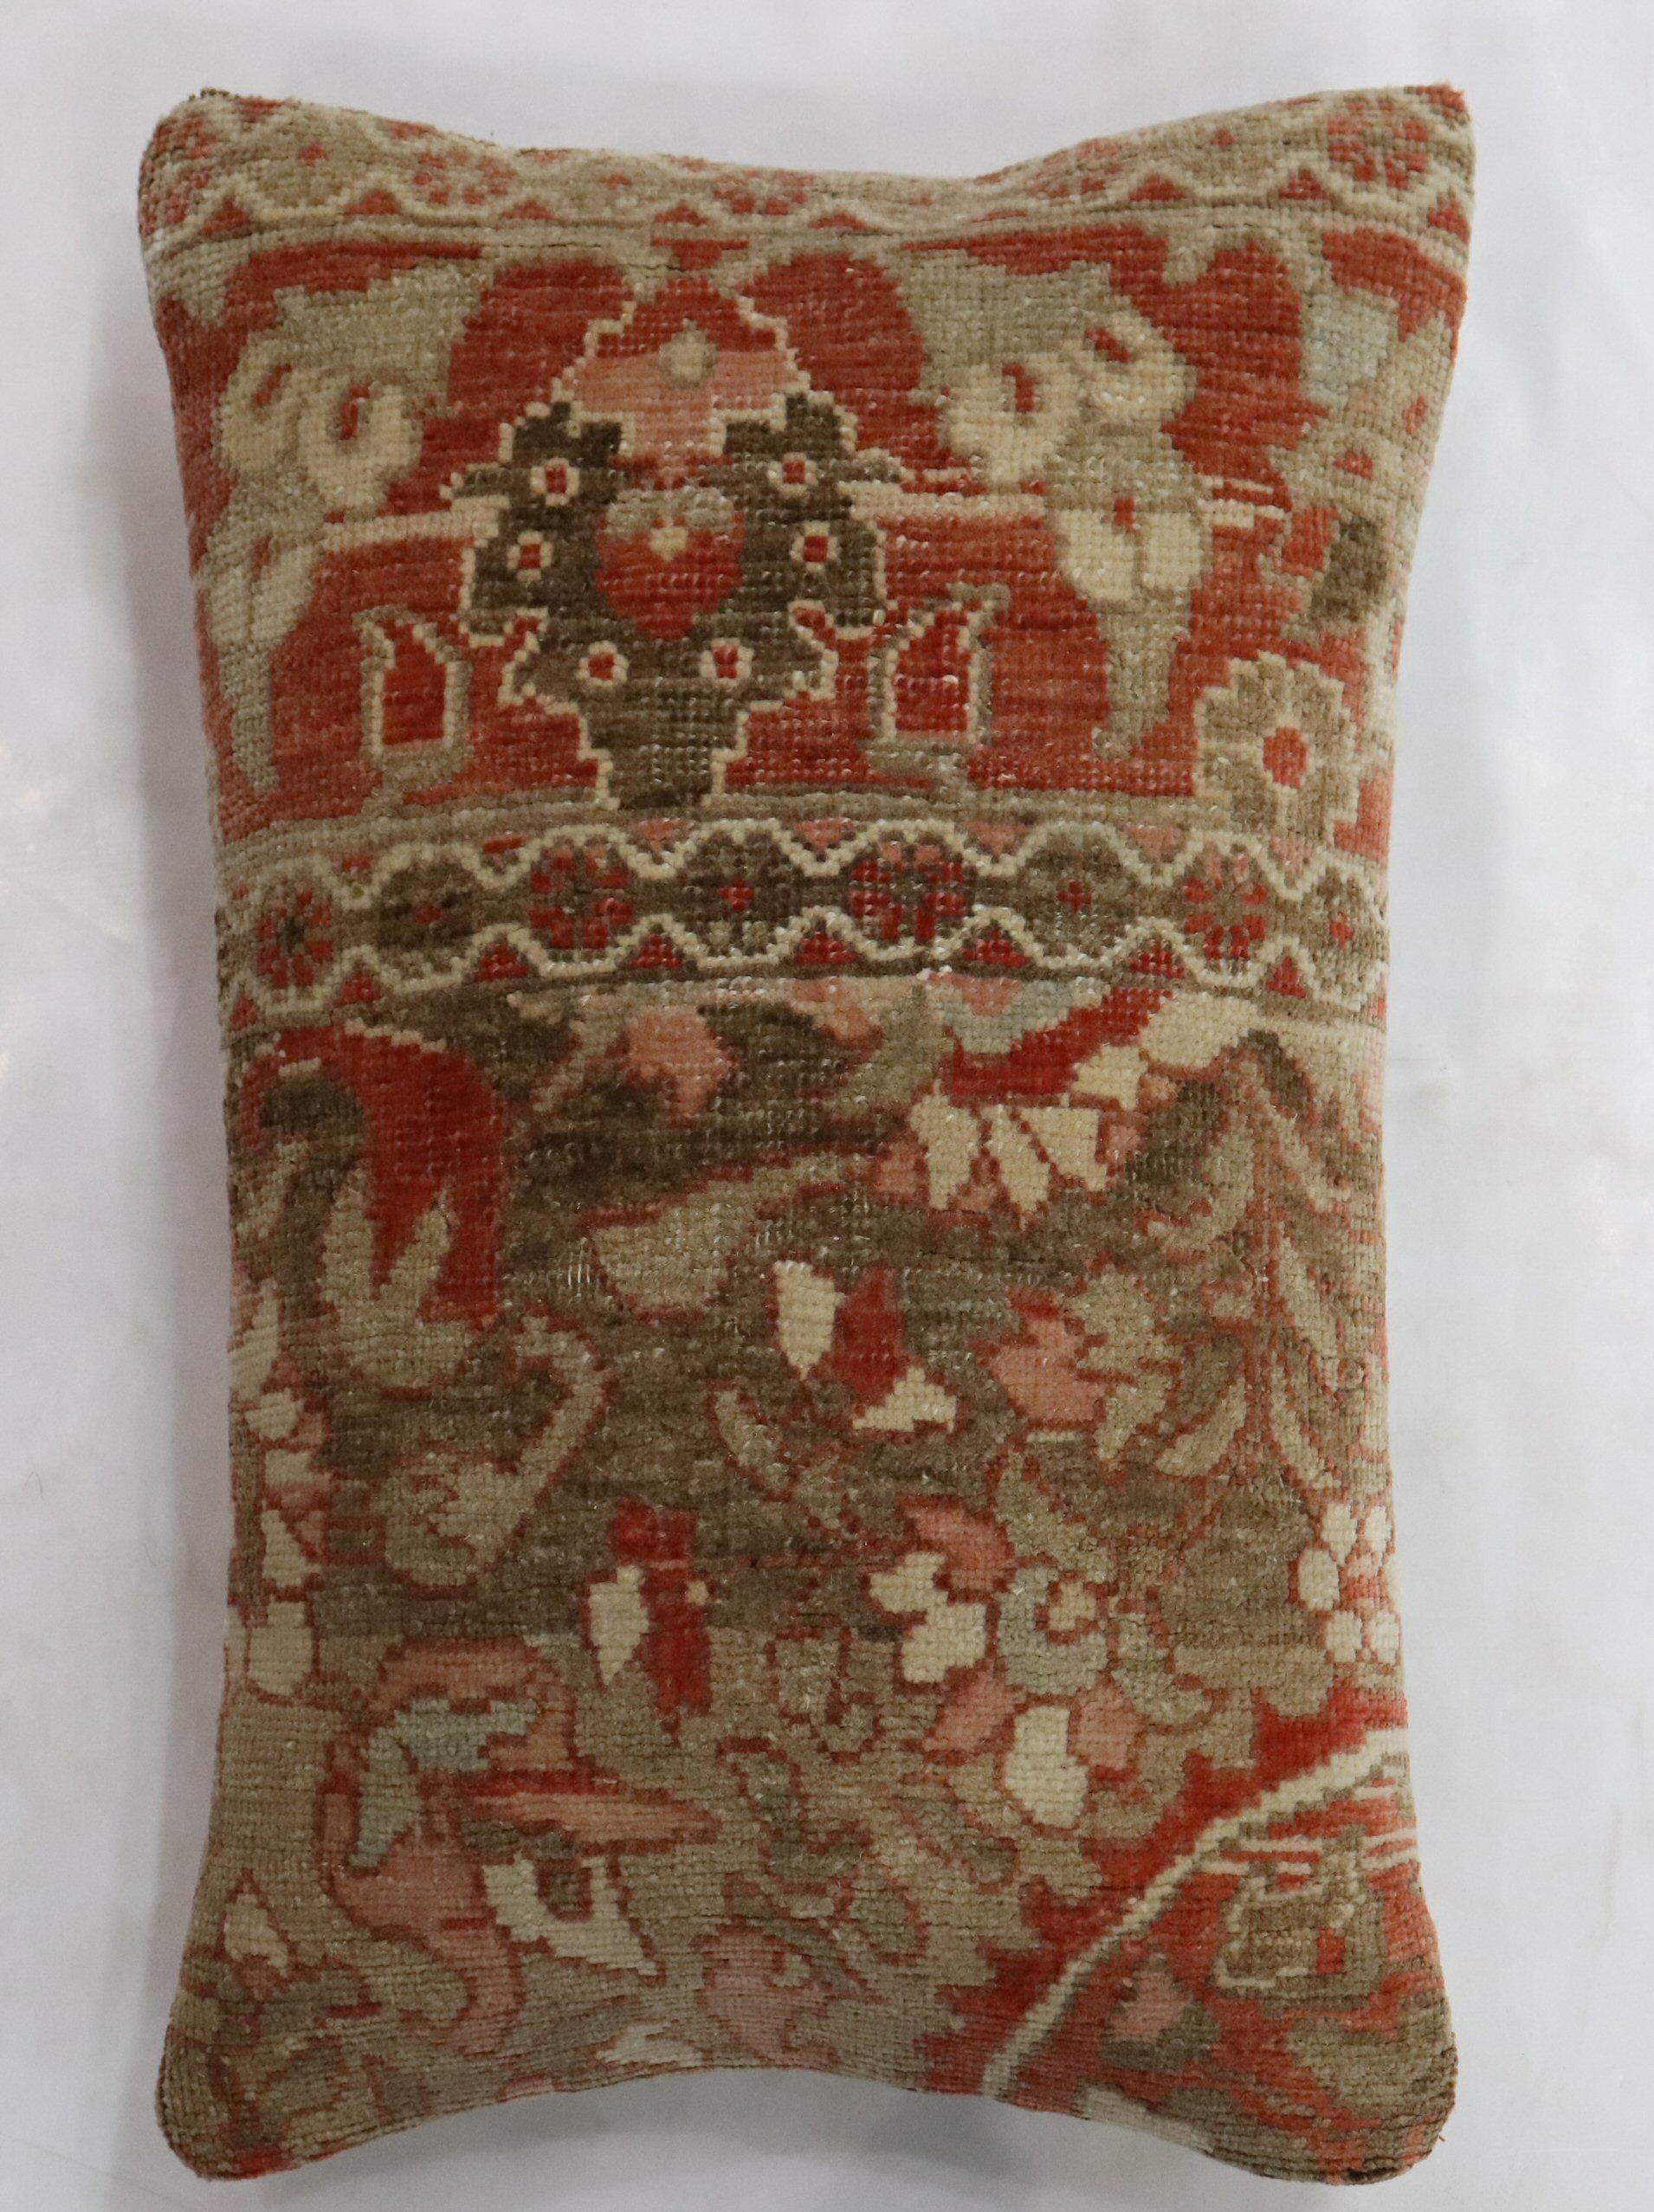 Pillow made from an antique persian Tabriz rug with poly fill and zipper closure provided.

Measures: 16'' x 24''.